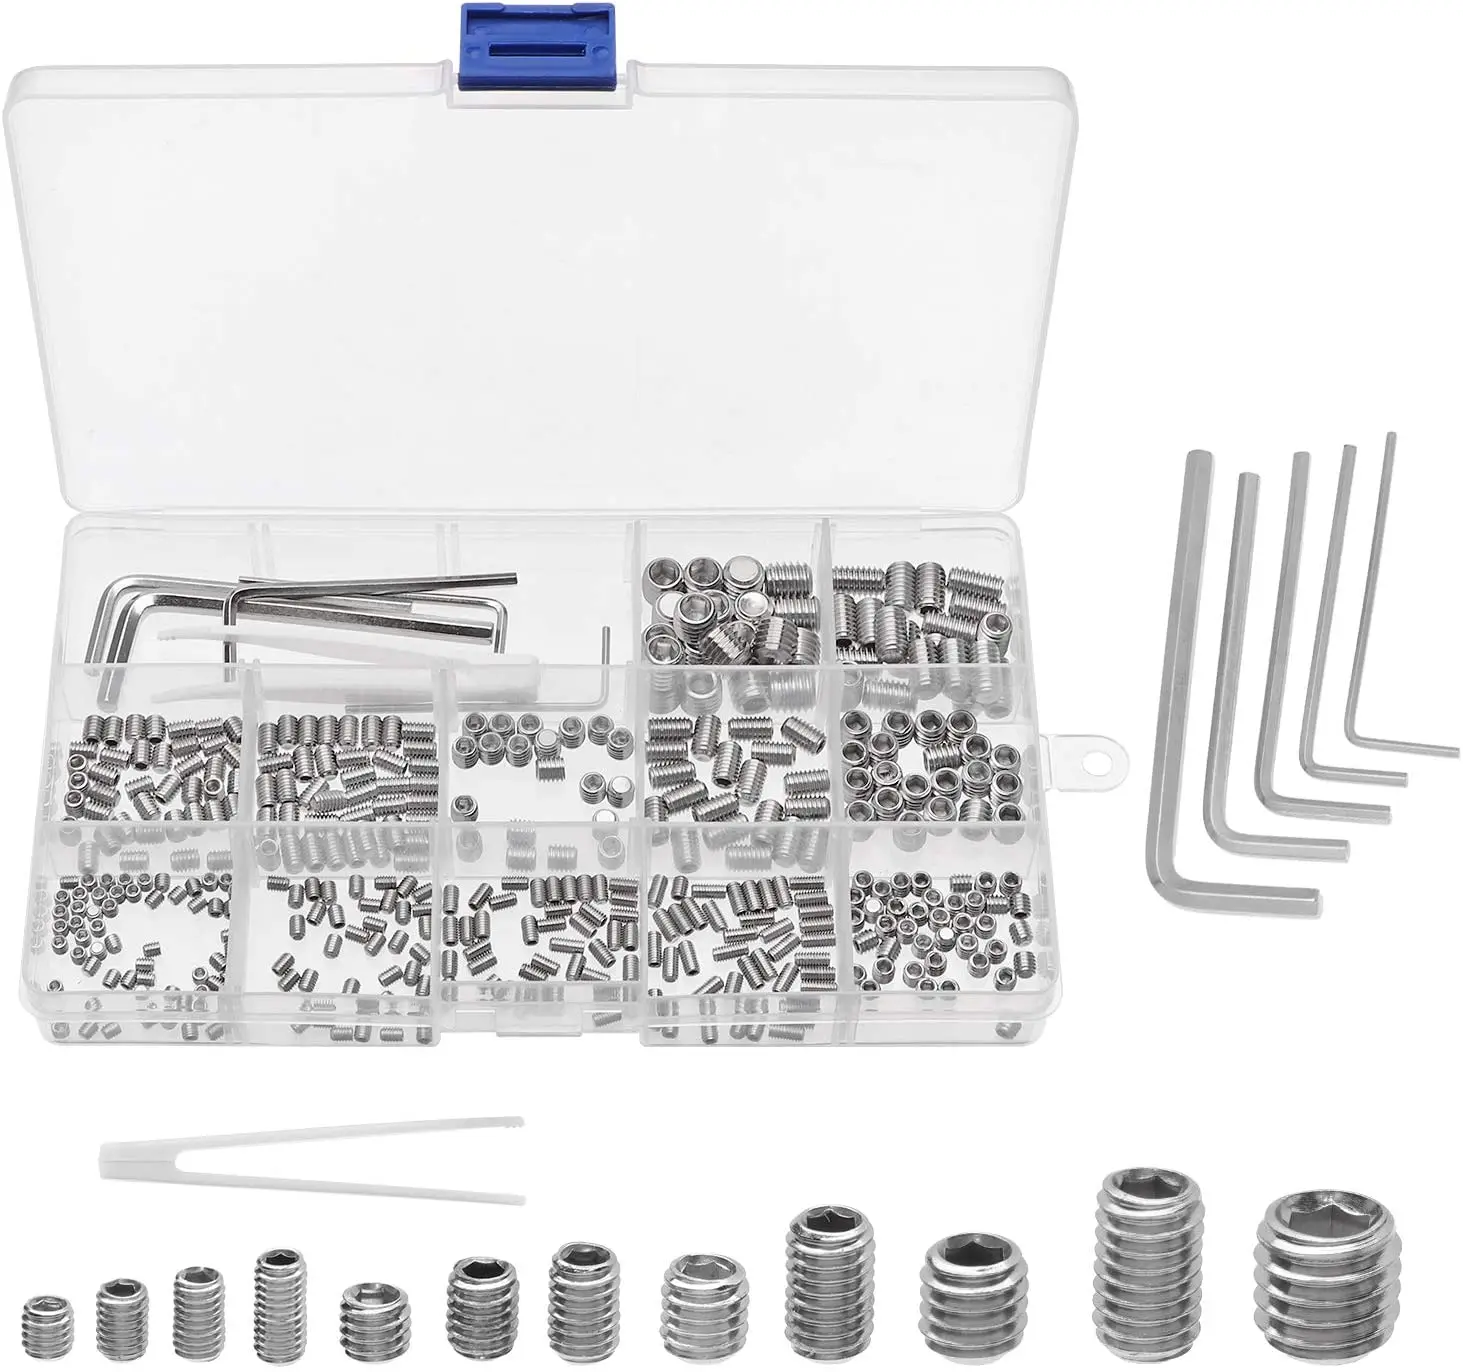 510 ASSORTED PIECE A2 STAINLESS M3 M4 M5 M6 M8 M10 M12 HEXAGON FULL NUTS KIT